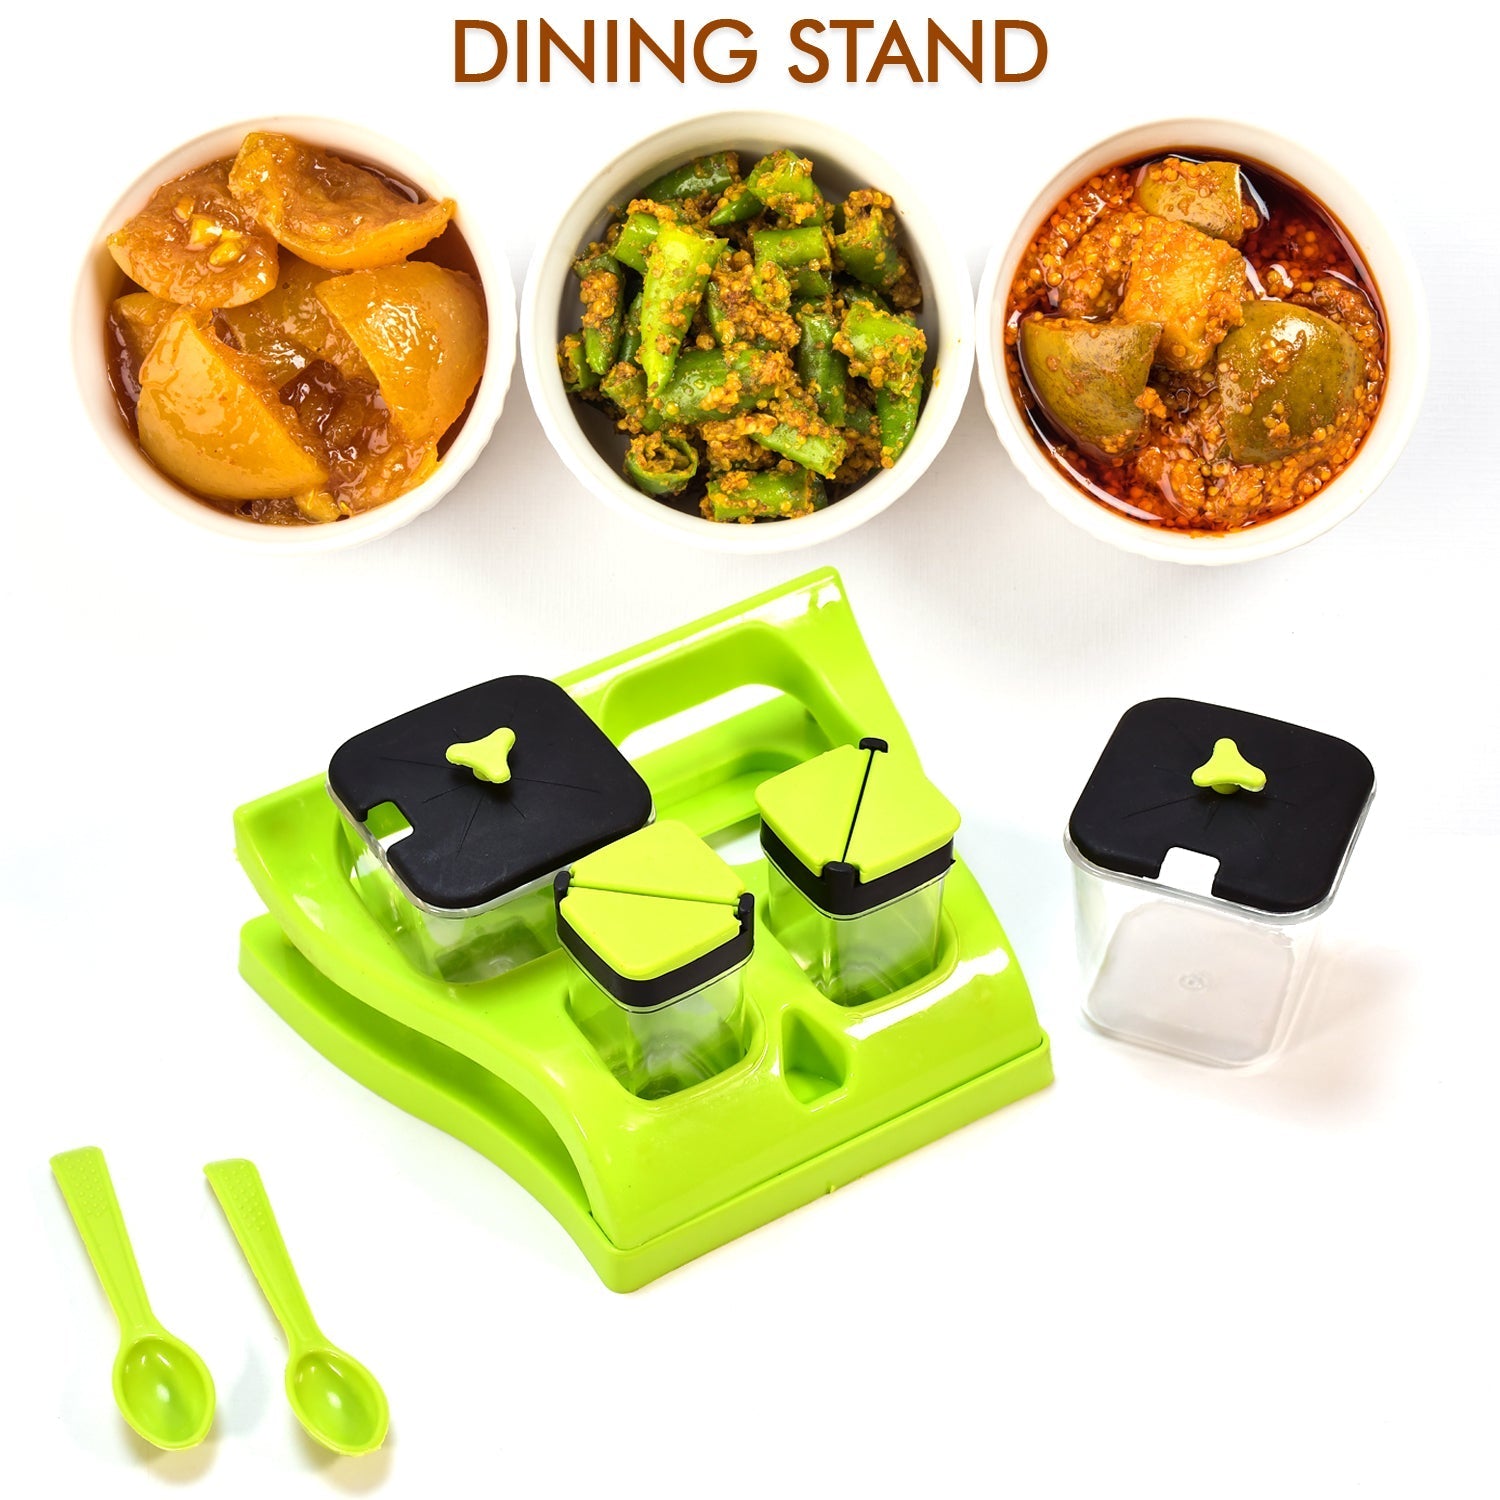 ﻿0078A Plastic Aachar pickle container/ chutney/ Mukhwas tray/ Masala tray Dinning Spice stand Dukandaily